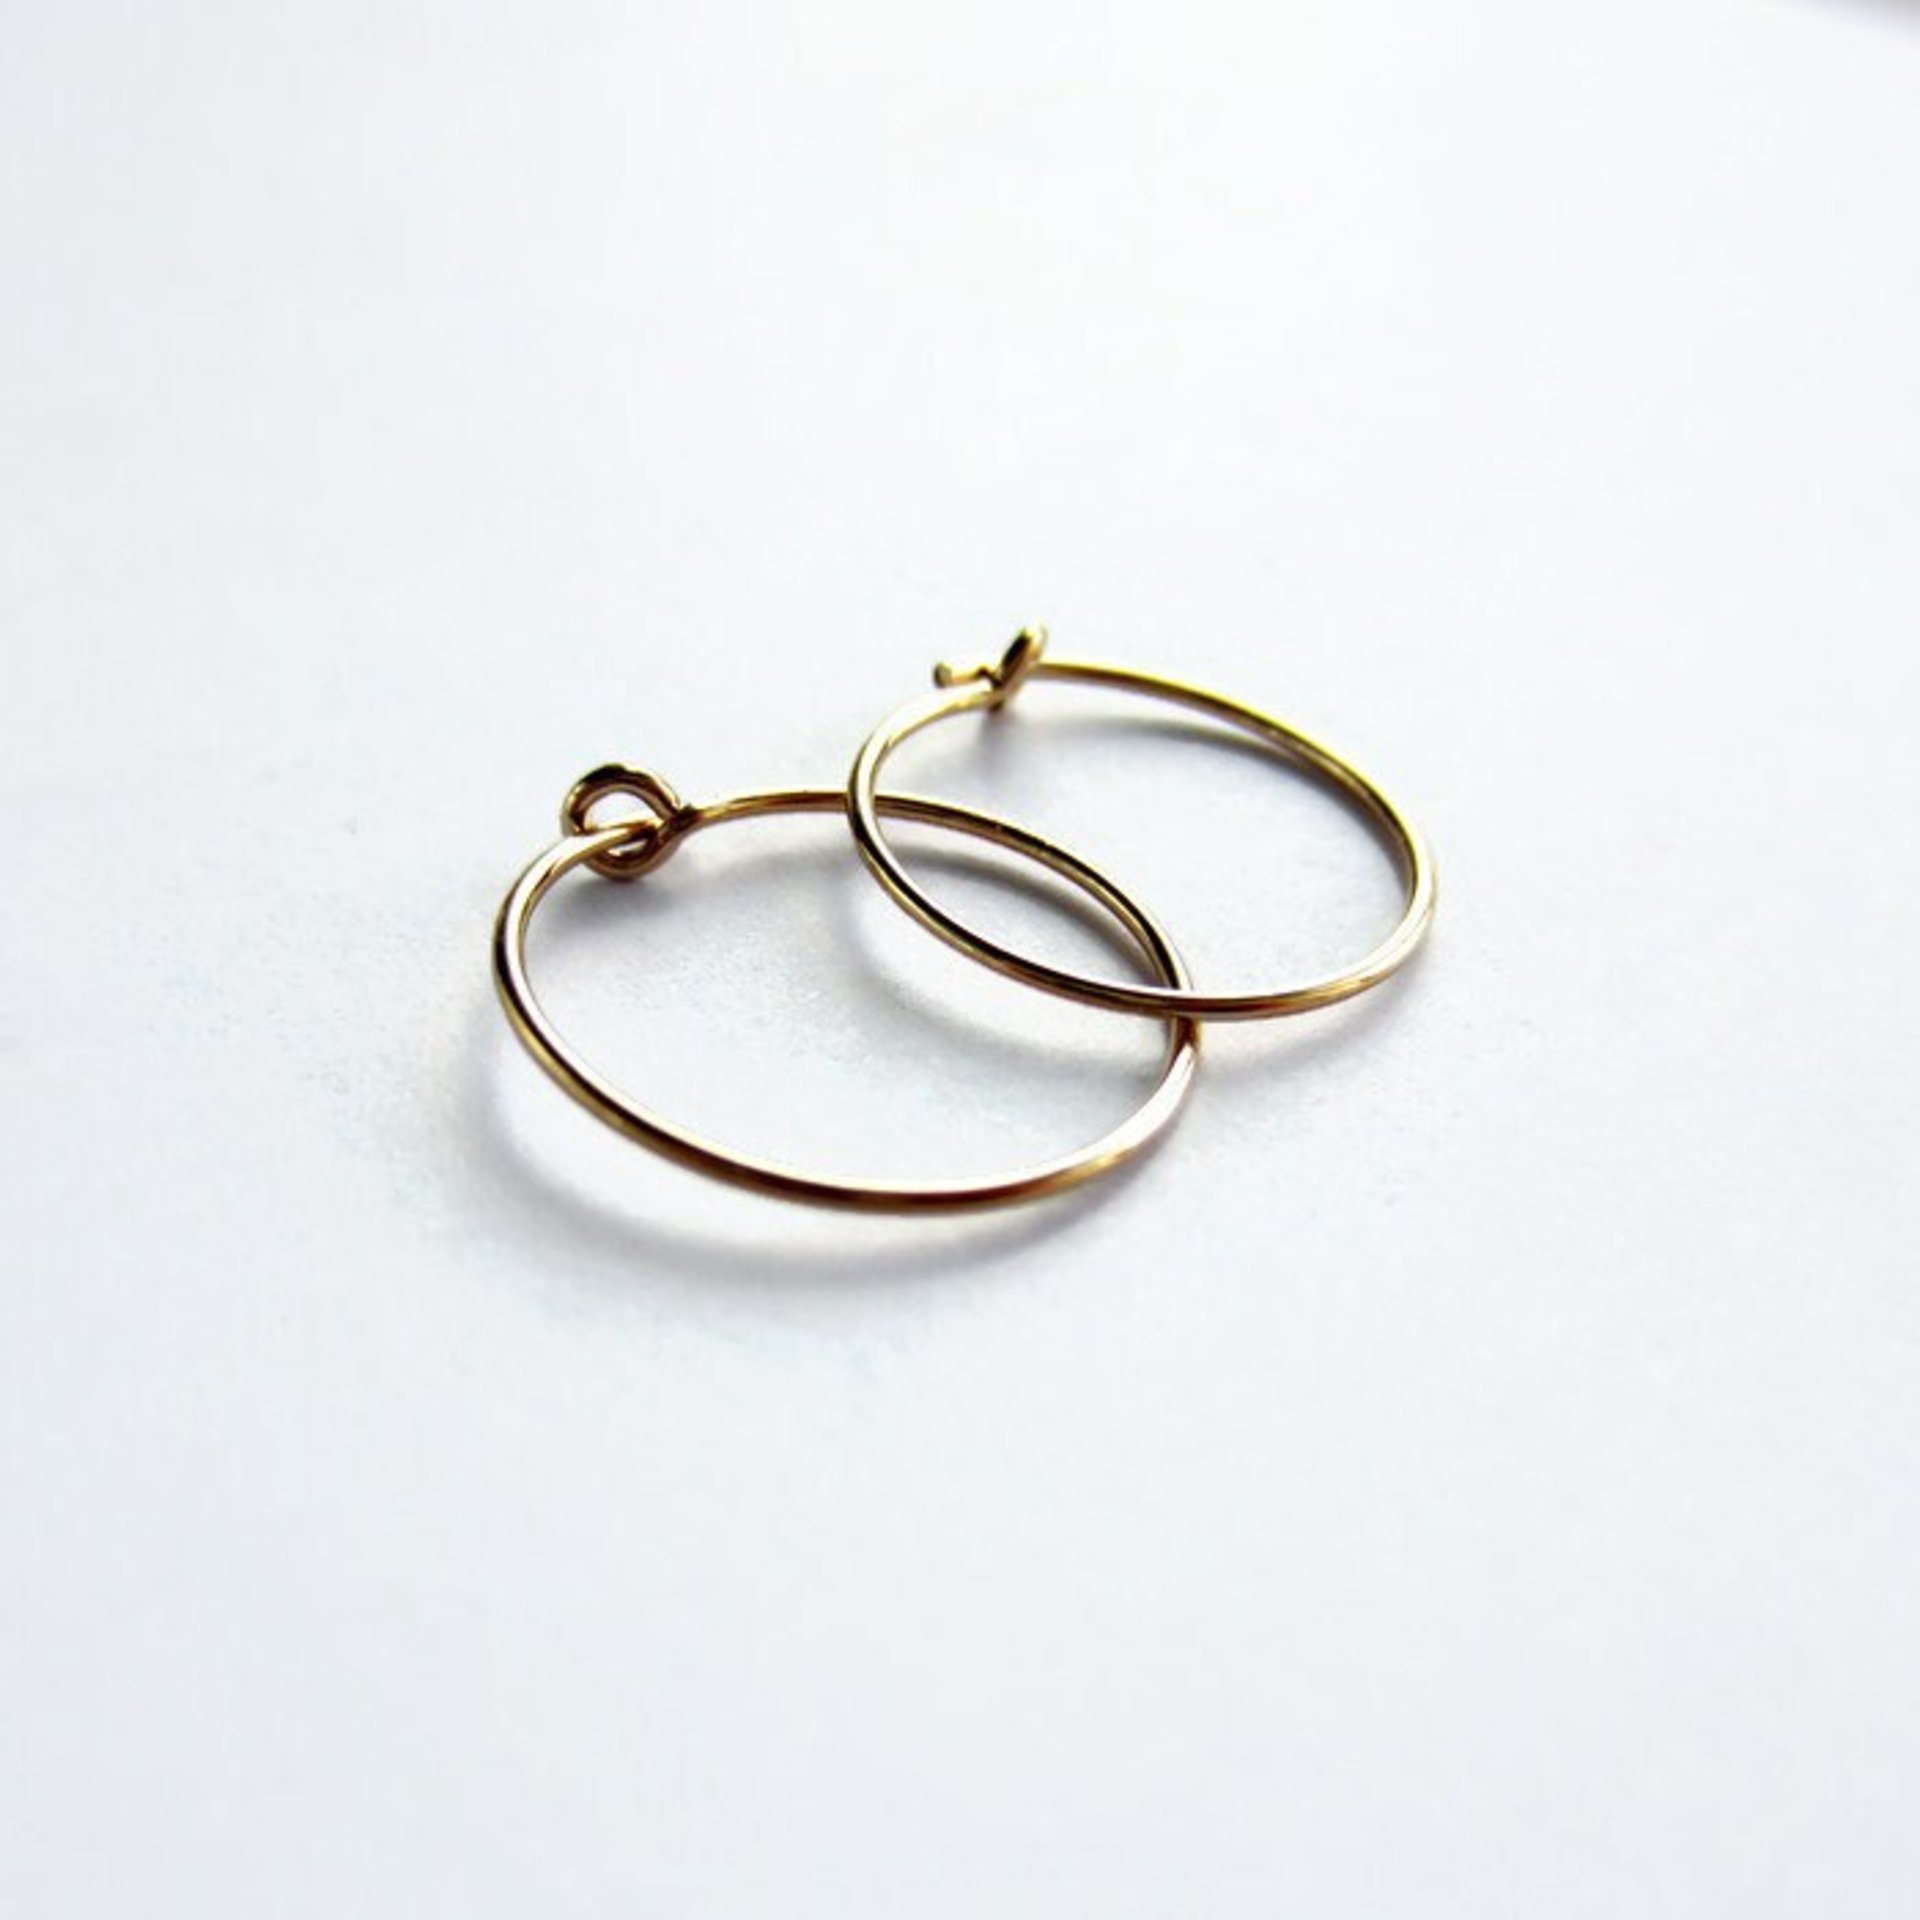 Single or Pair of 15mm 14K Gold Filled Thin Hoop Earrings ~ The Tiny Tree Frog Jewellery